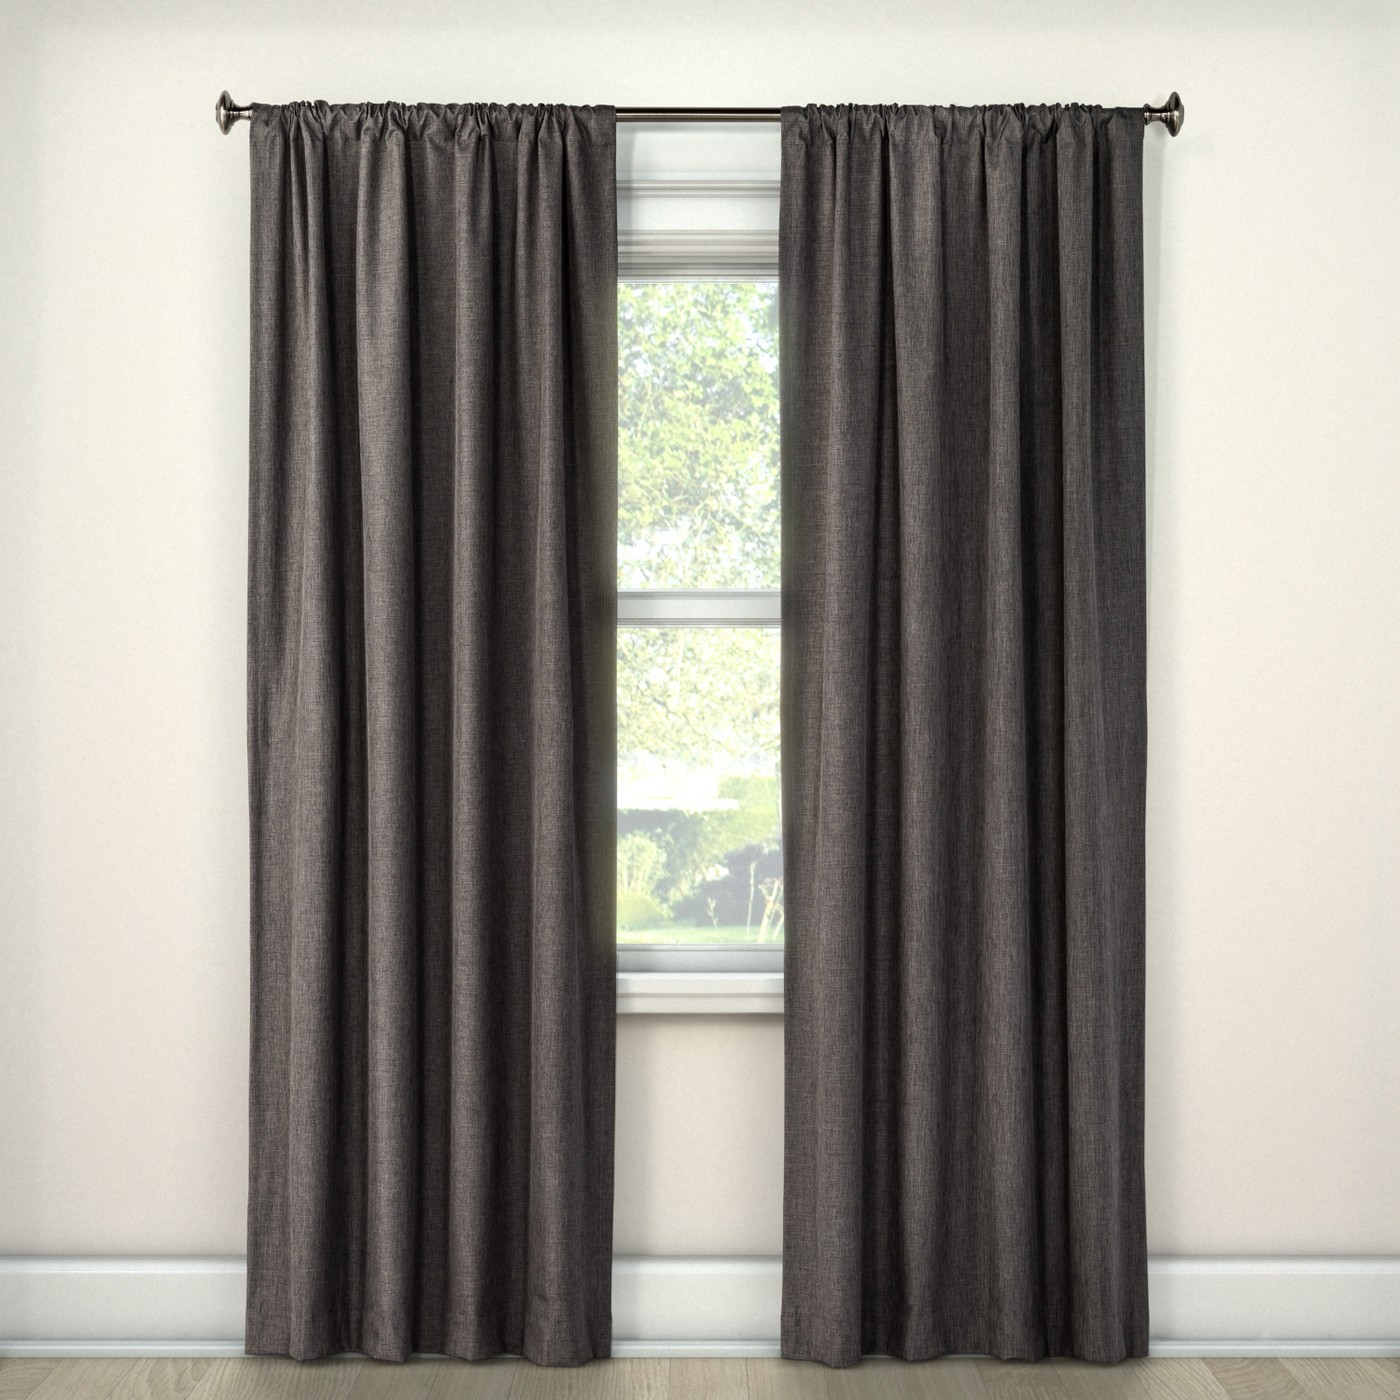 Target: Save Extra 30% Off Window Panels! Lightblocking Curtain Panels Only $6.99!